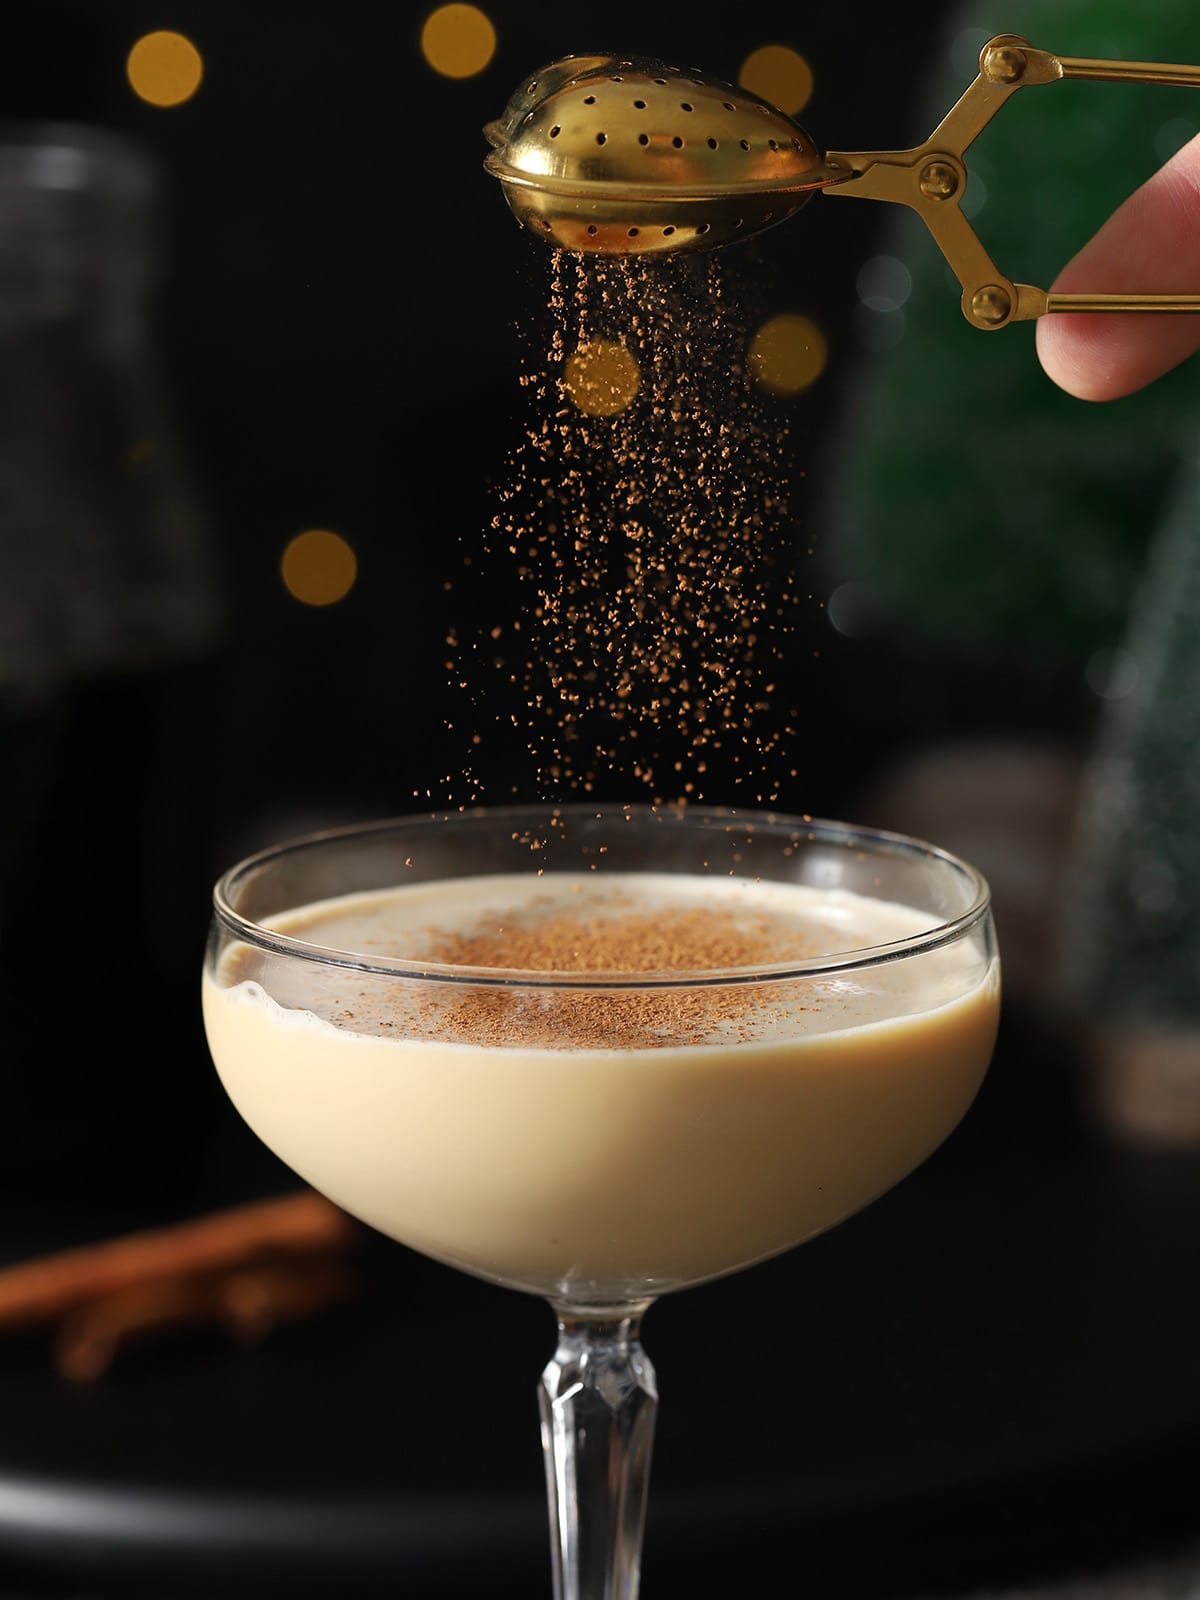 Cinnamon being sprinkled onto a gingerbread martini. 